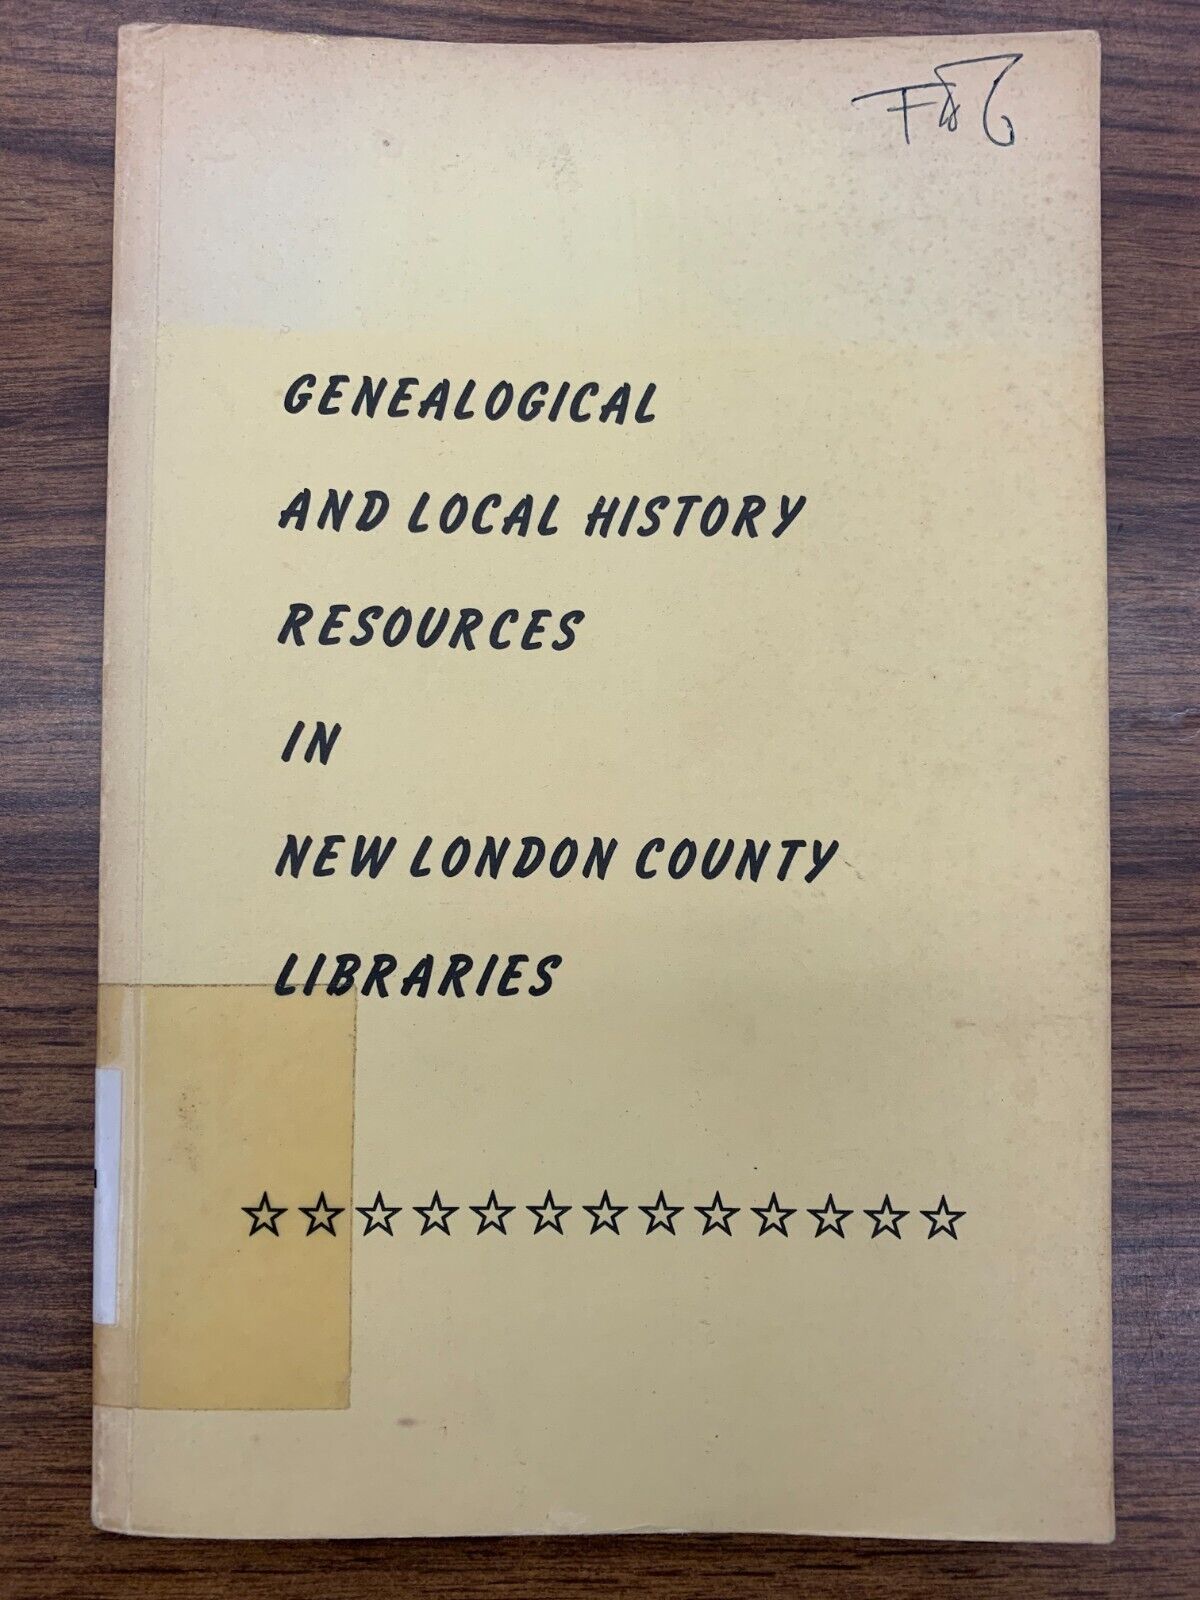 Genealogical and Local History Resources in New London County Libraries